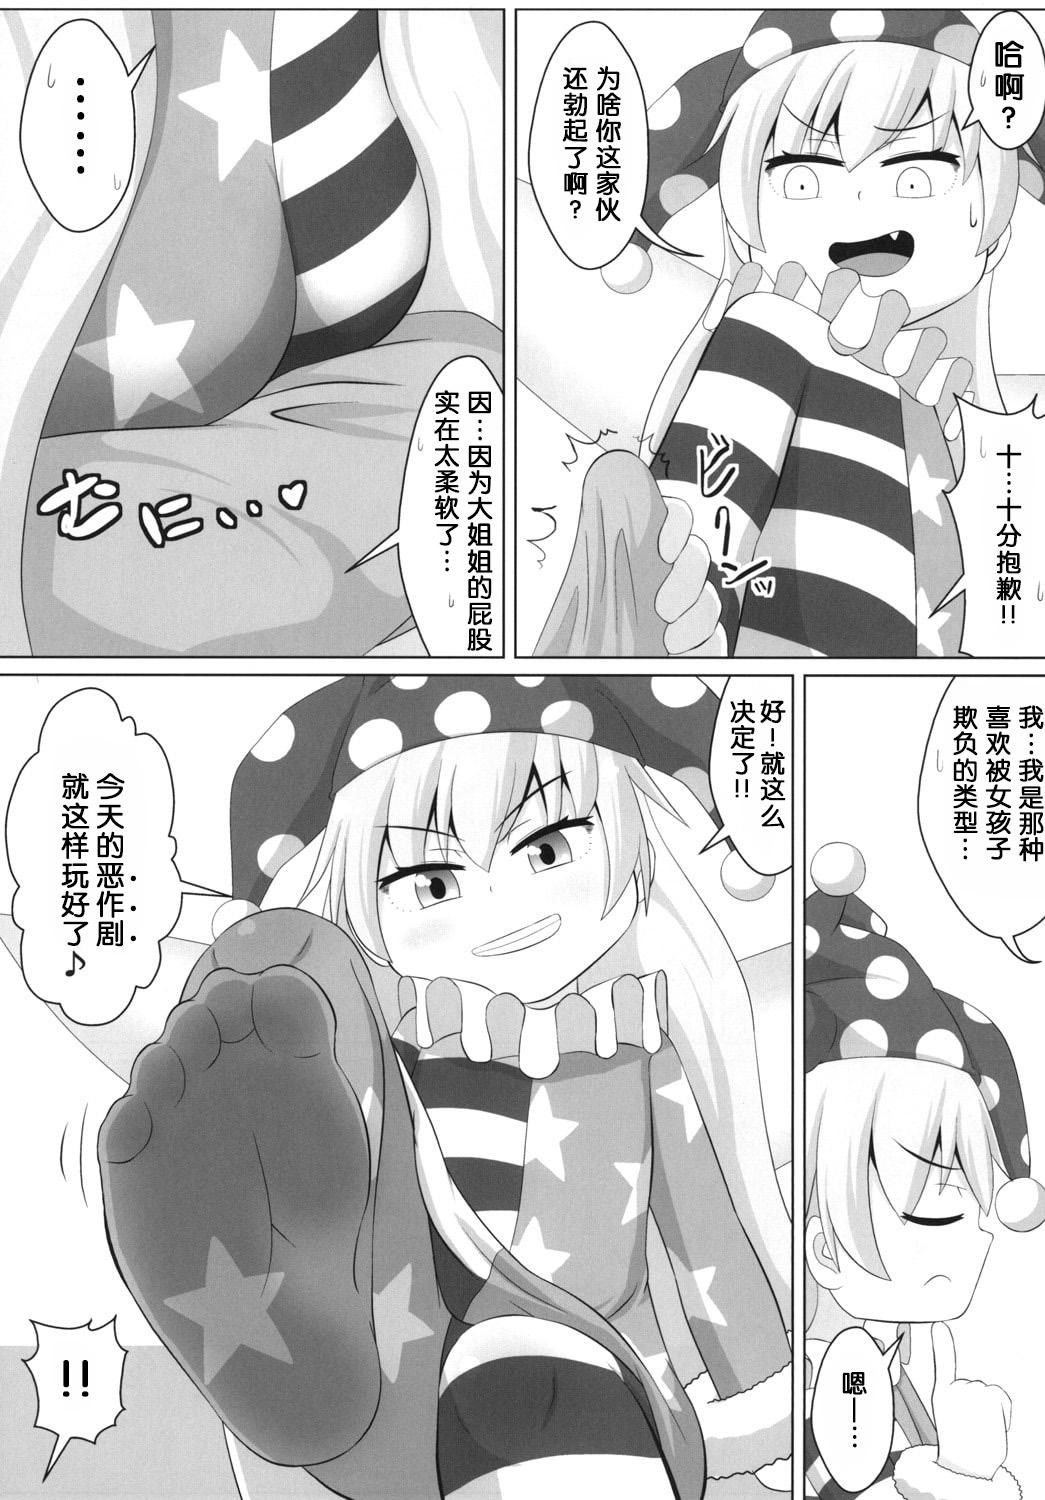 Pale Yousei no Itazura - Touhou project Old - Page 6